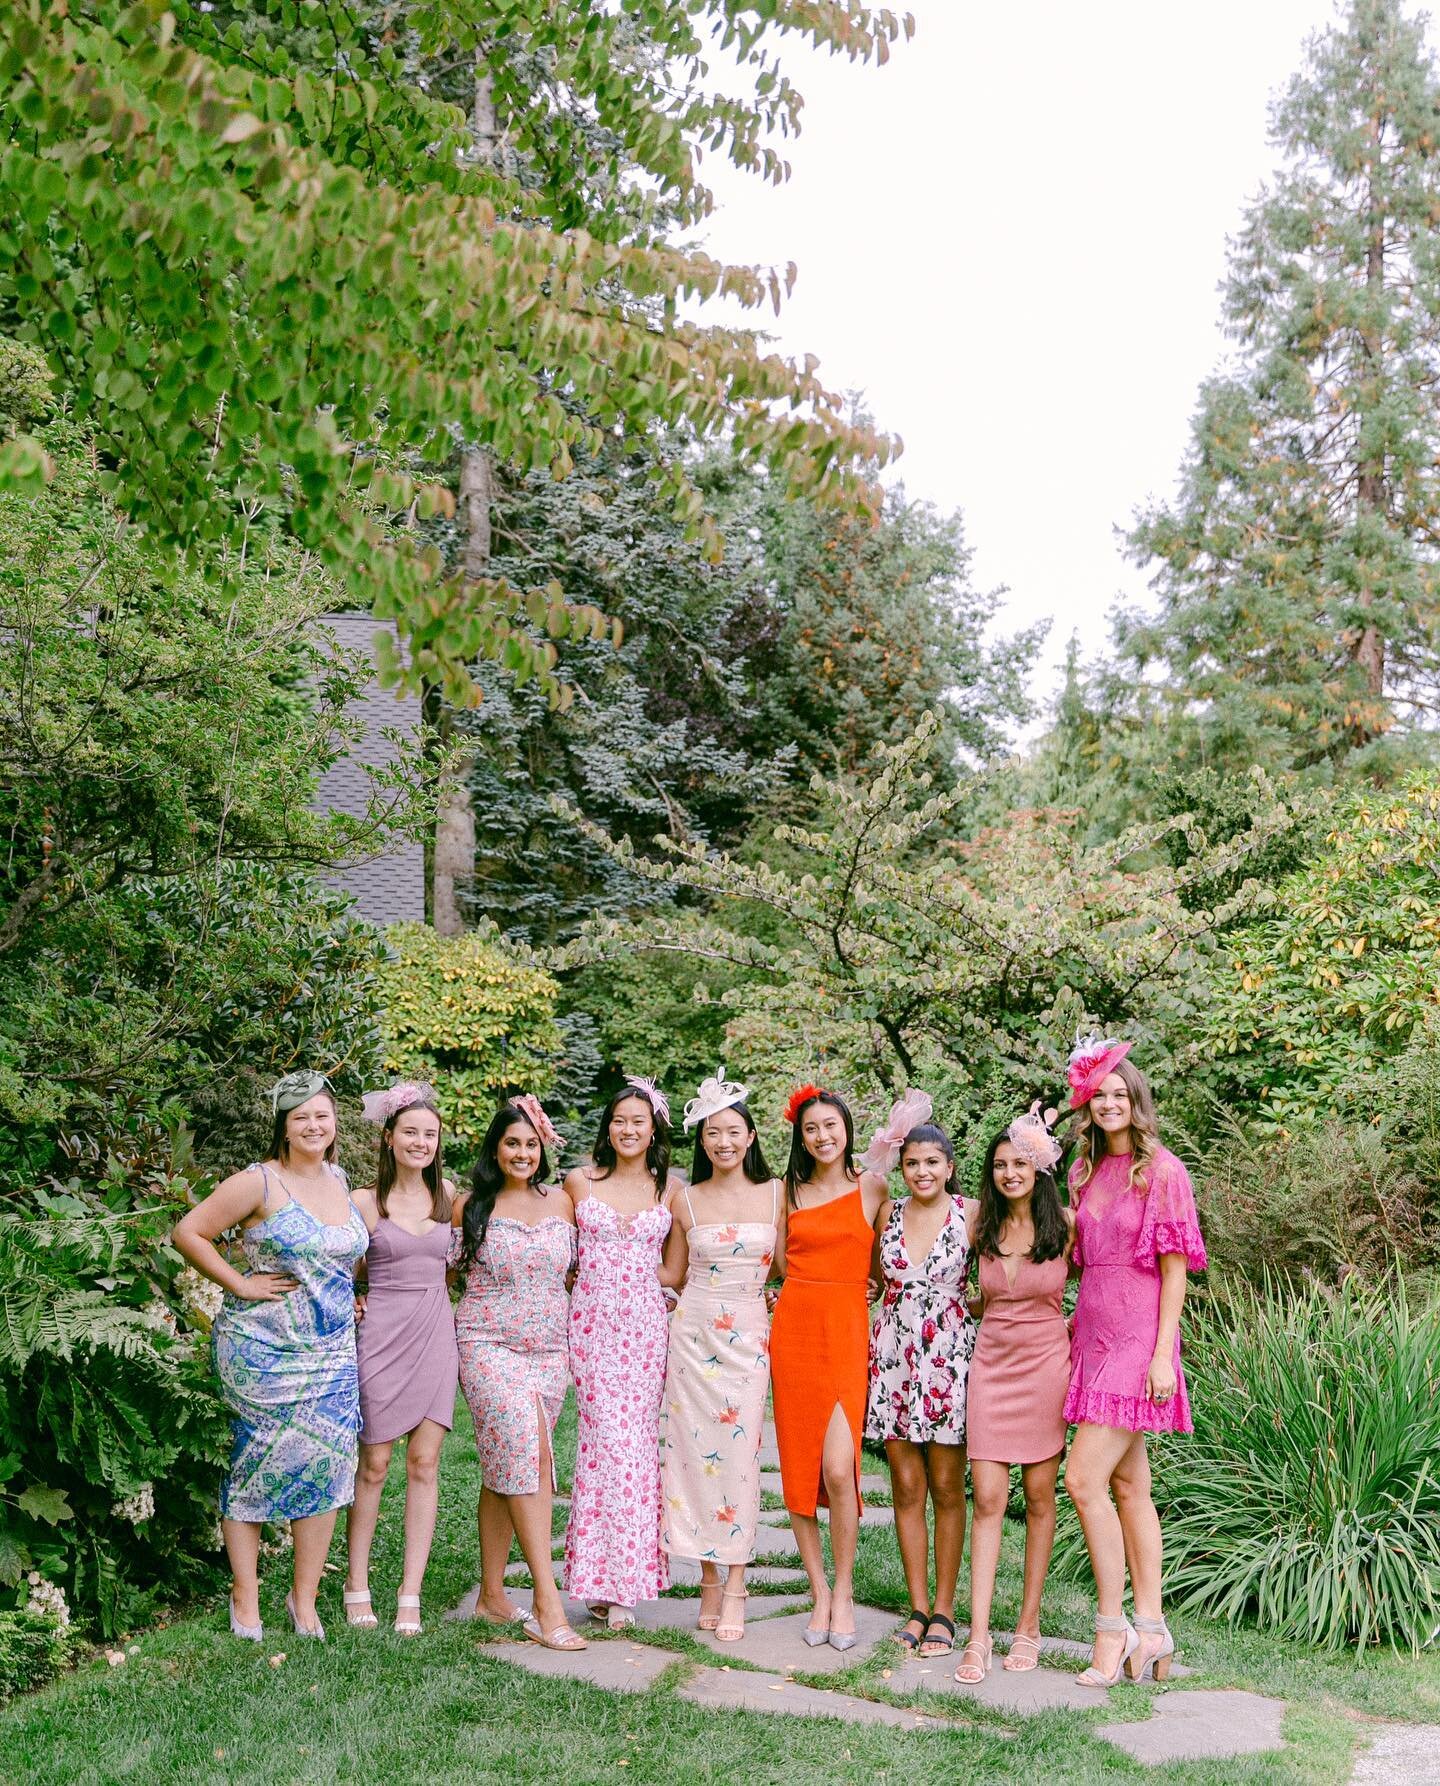 Clara and her bridesmaids rocked the Kentucky Derby rehearsal dinner theme. From  the fascinators to all the beautiful colors, they really looked amazing! 🐎 👒 🌸 
.
.
.
.
.
.
Planning &amp; Design @valleyandco 
Floral @valleyandco 
Venue @bellaluna